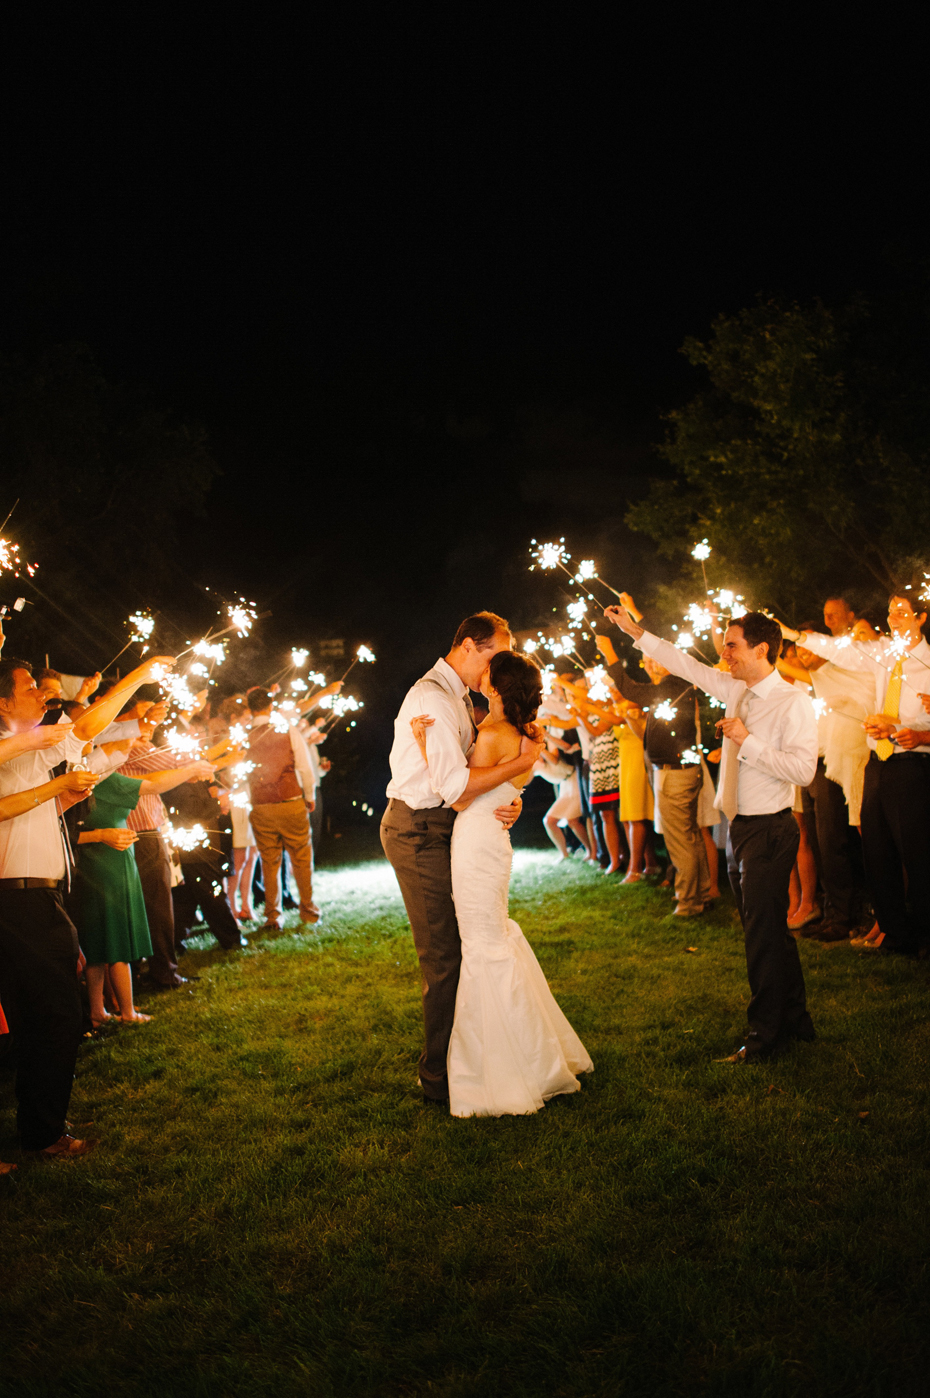 The bride and groom share one more kiss and then exit their wedding reception while guests hold sparklers at a backyard wedding by Bloomfield Hills wedding photographer Heather Jowett.